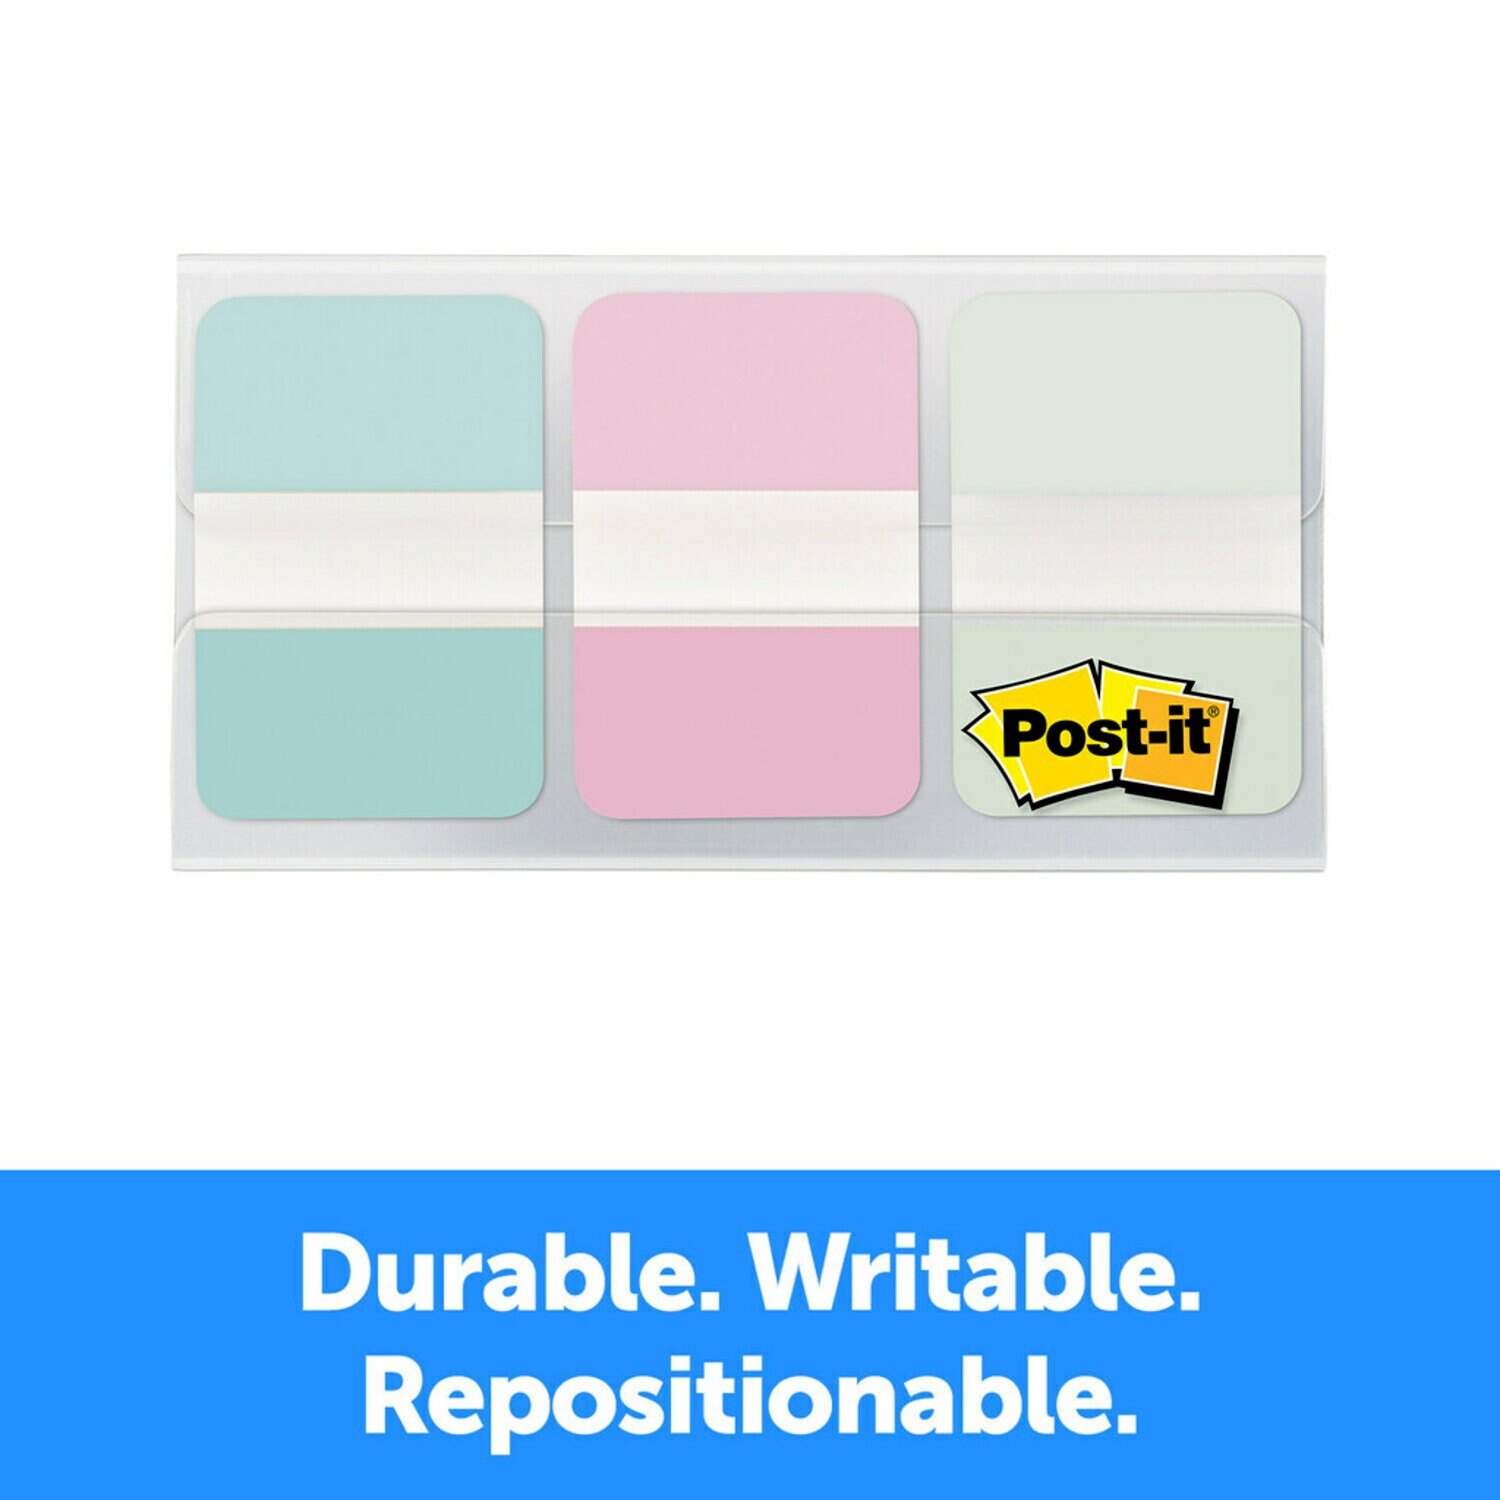 7010410490 - Post-it Durable Tabs, Gradient, 1 in. x 1.5 in. (25.4 mm x 38.1 mm),
36/pack, 24/case